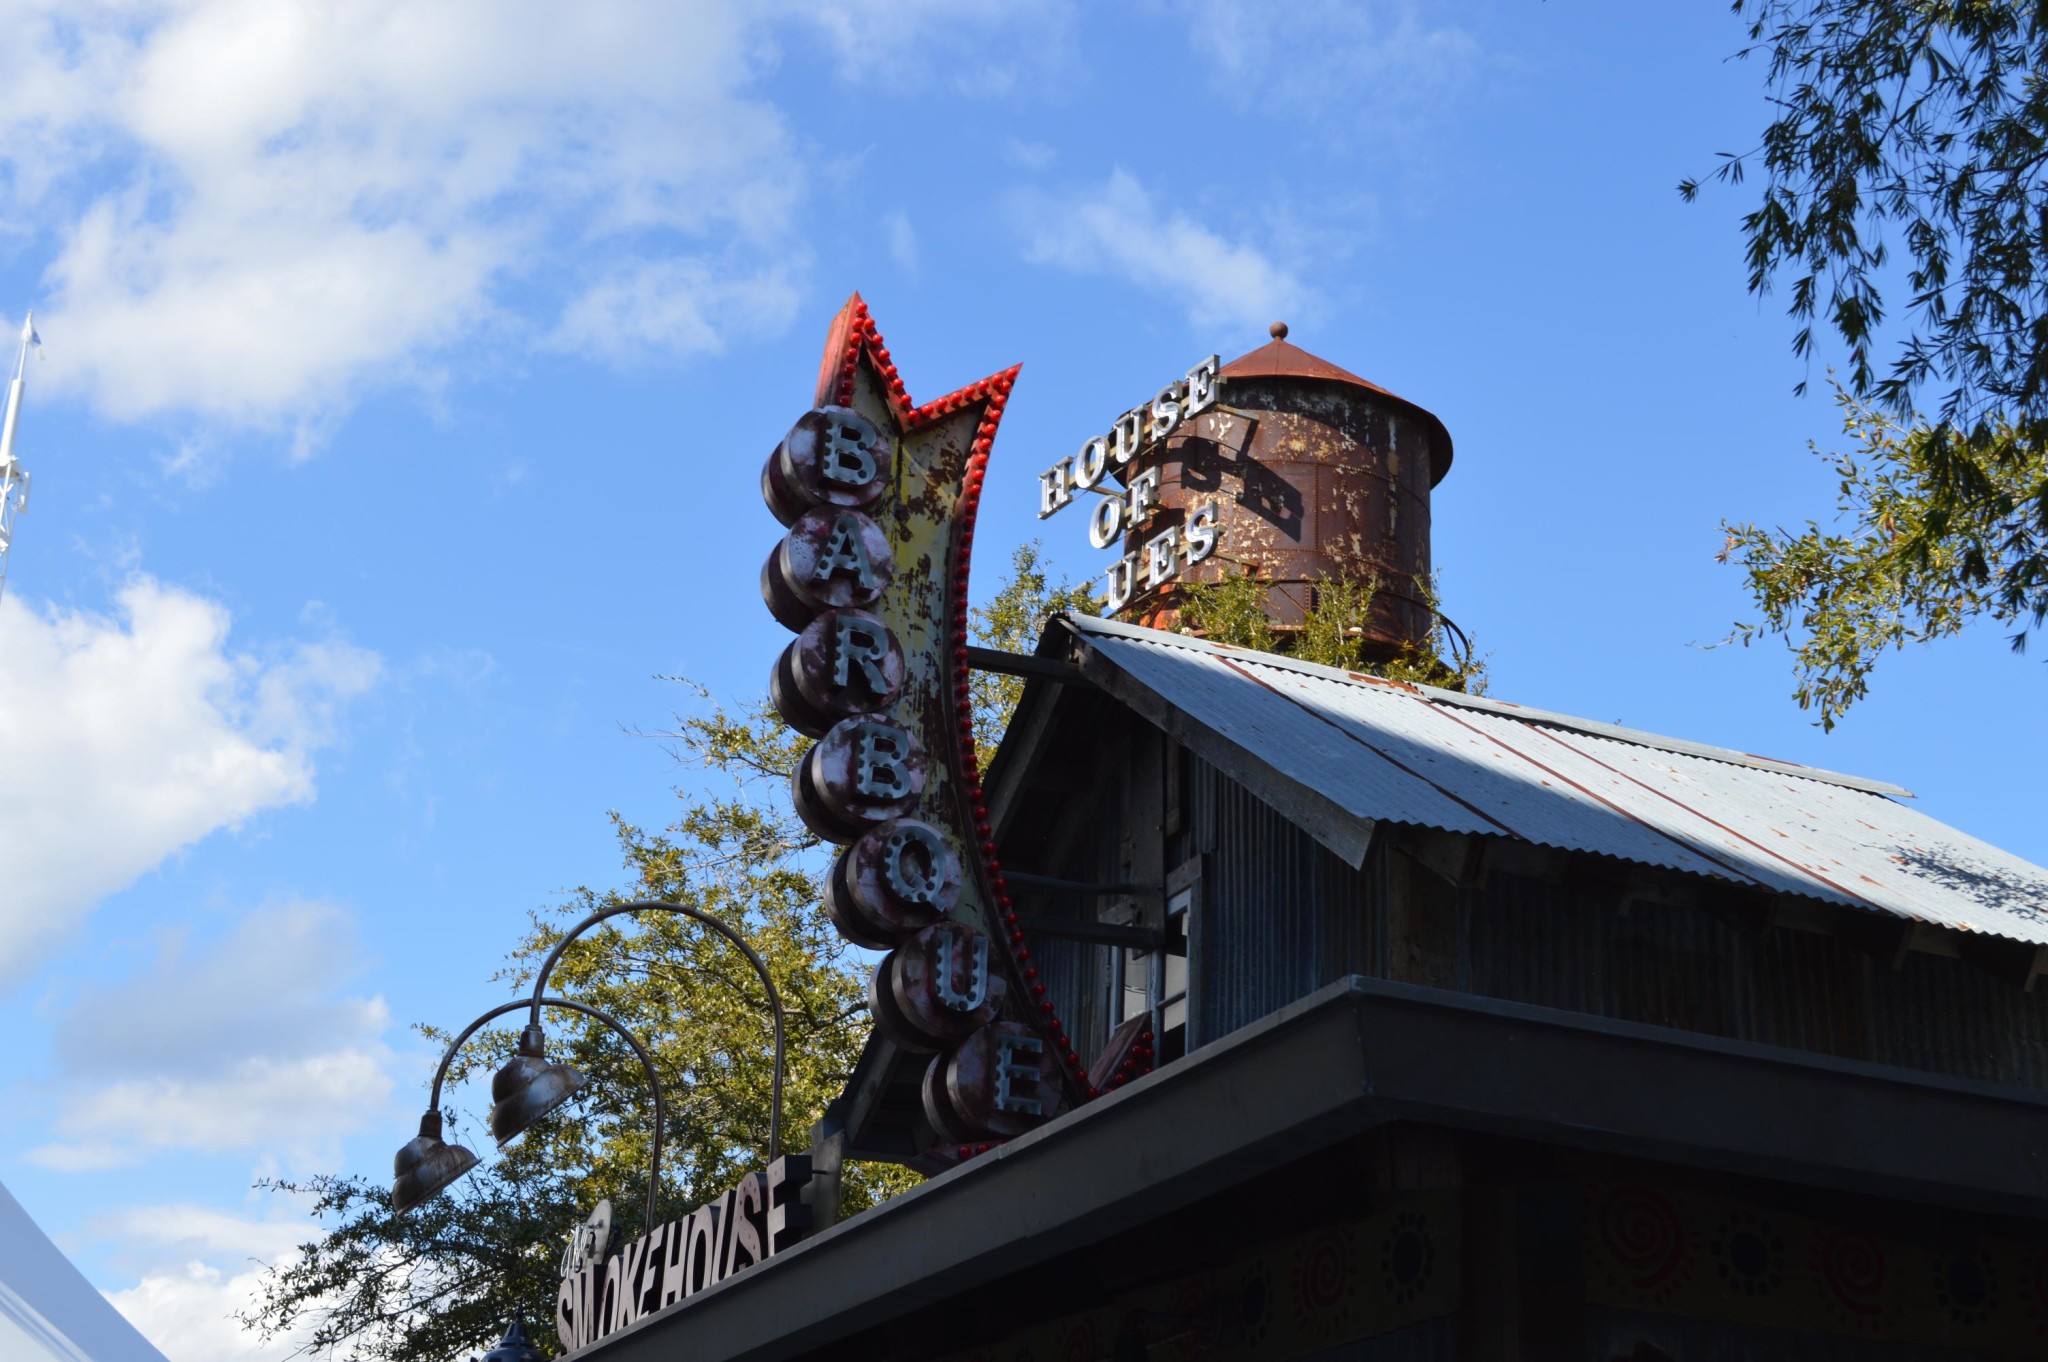 New House of Blues Smokehouse Quick Service Disney Dining Restaurant Review